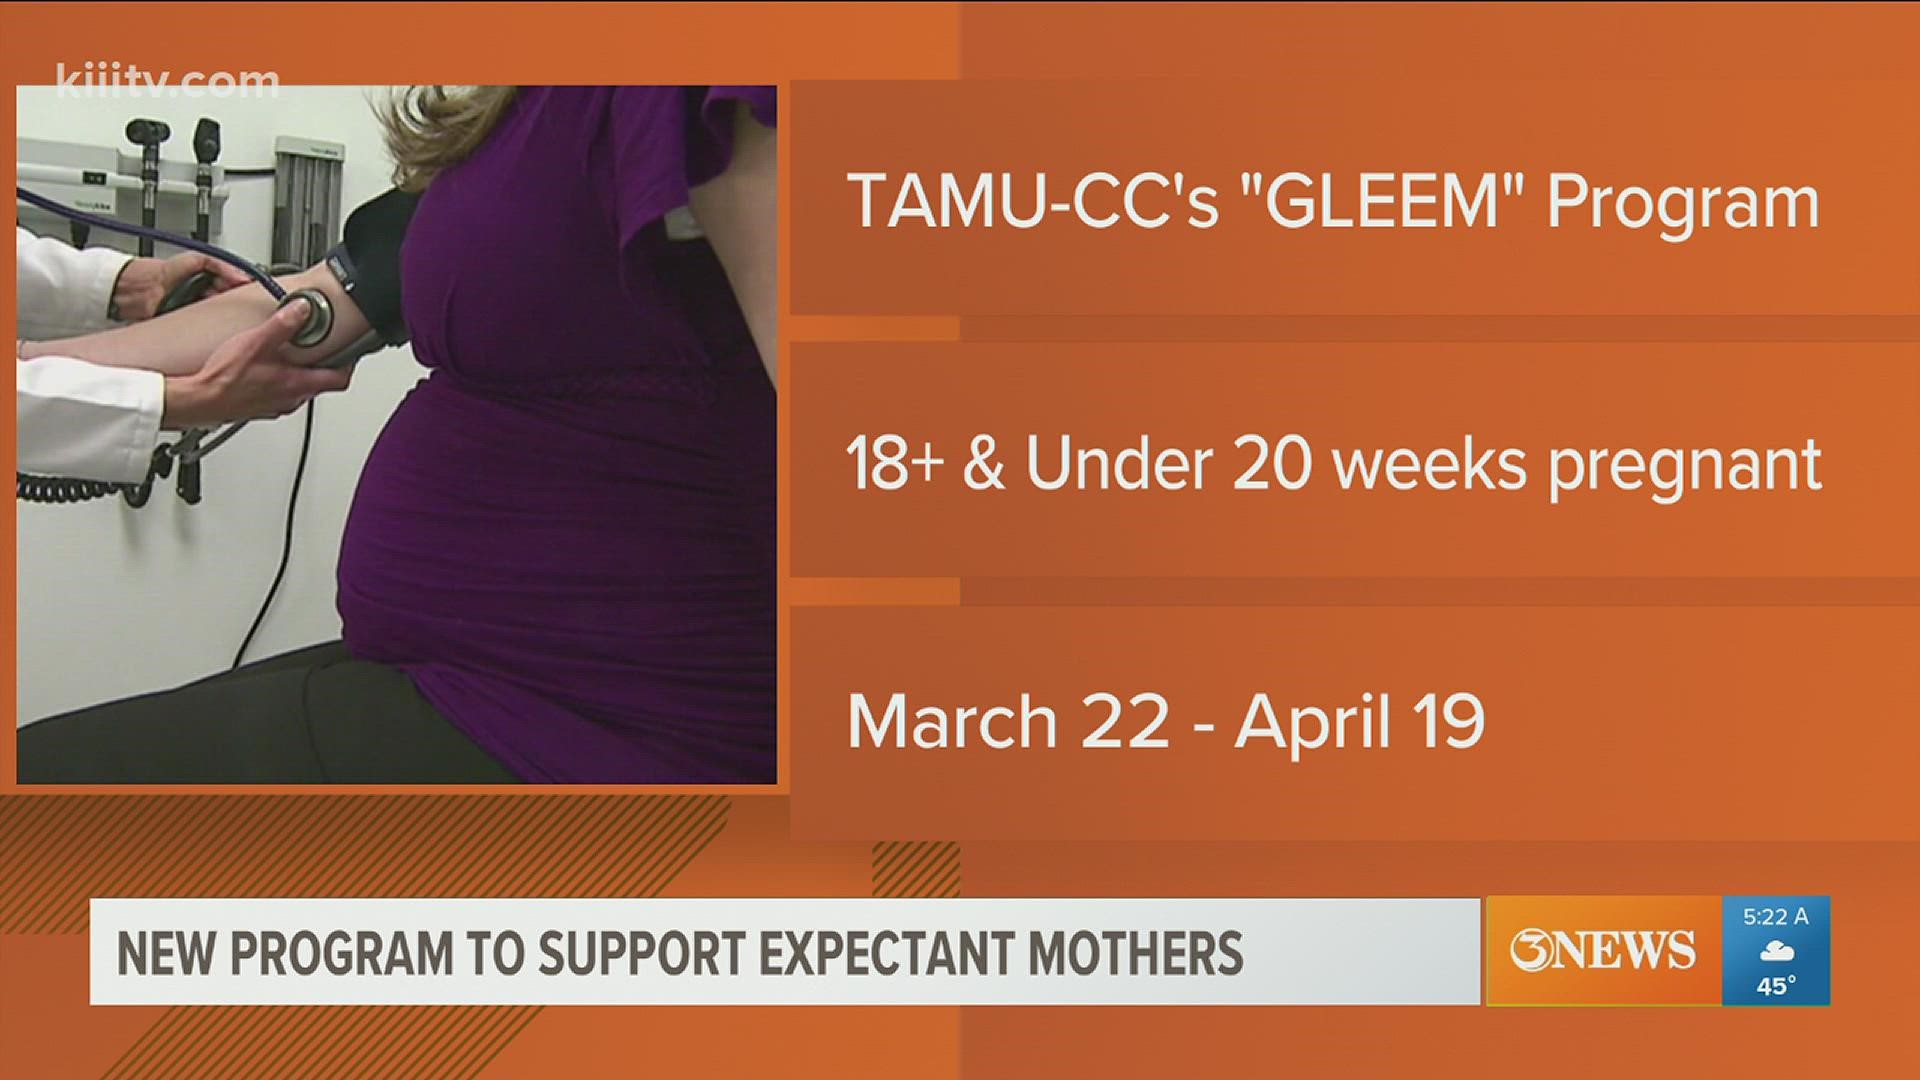 GLEEM is a 5 week program aimed at connecting expectant mothers with healthcare providers, and educating them on the maternal process.